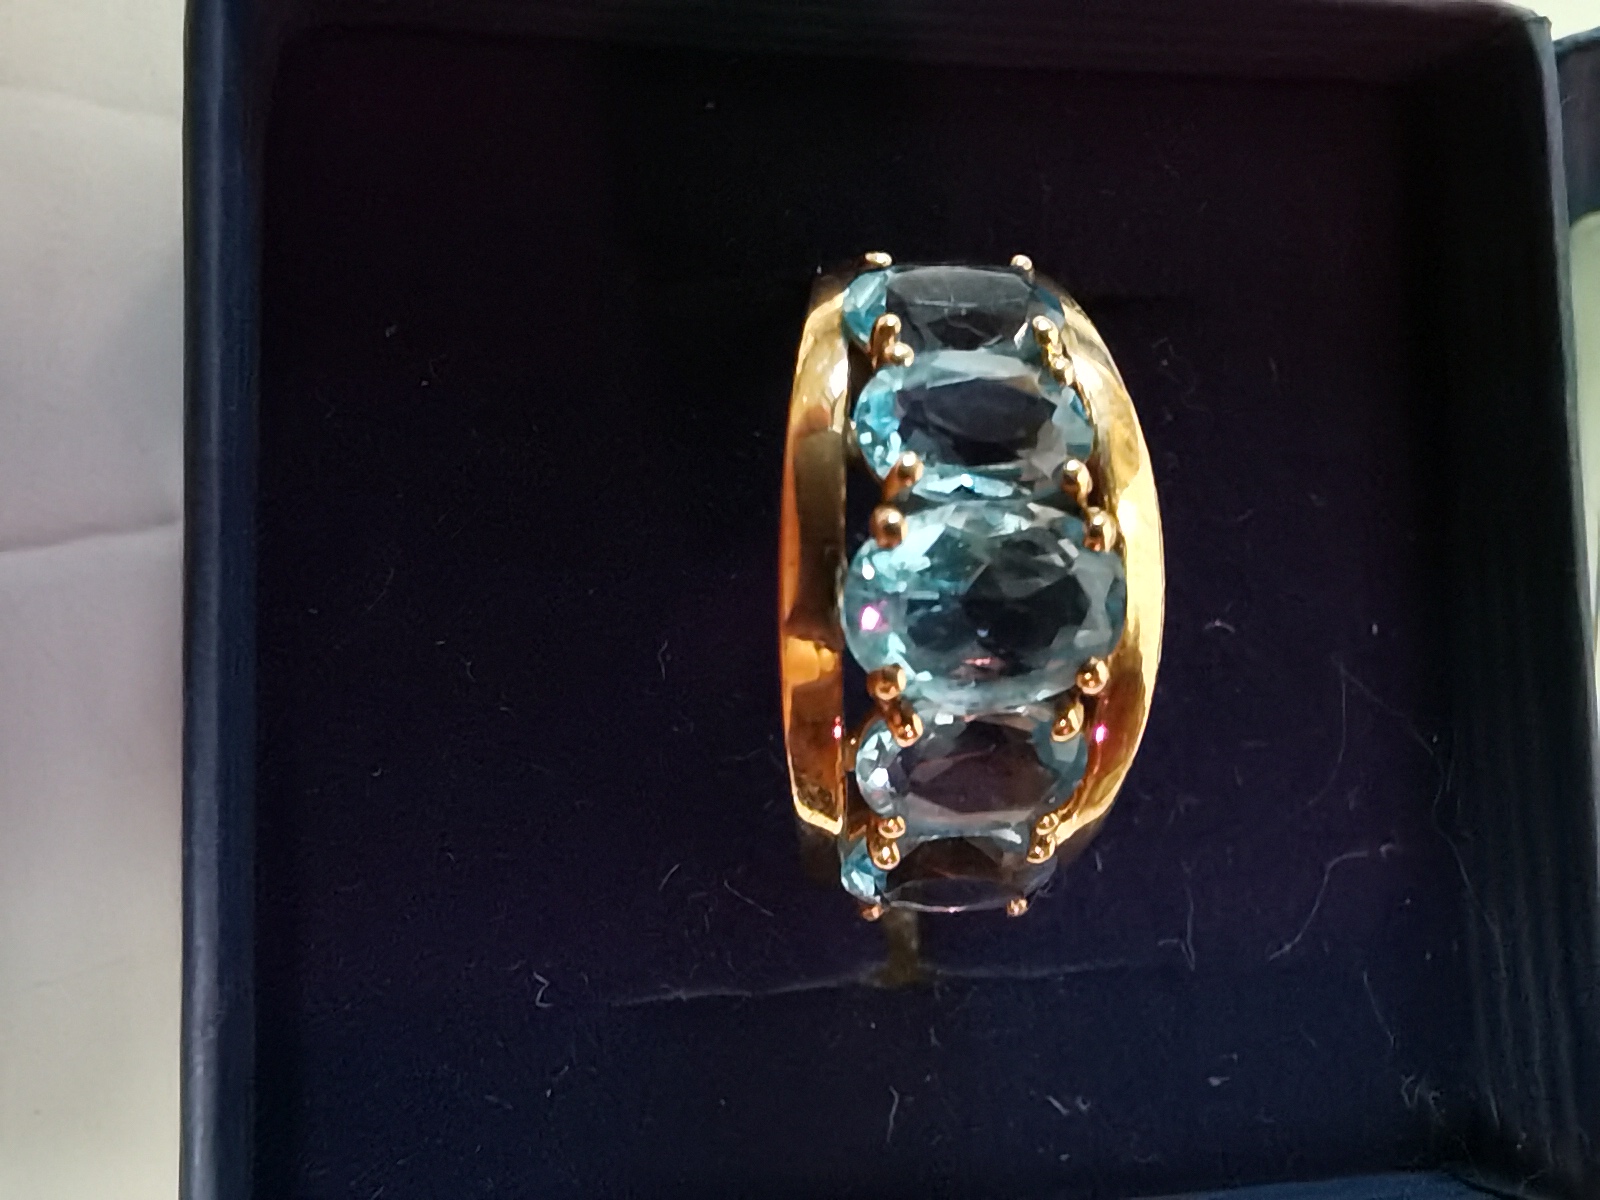 9ct gold ring with 5 oval blue stones ie aqua marine size P - Image 2 of 2